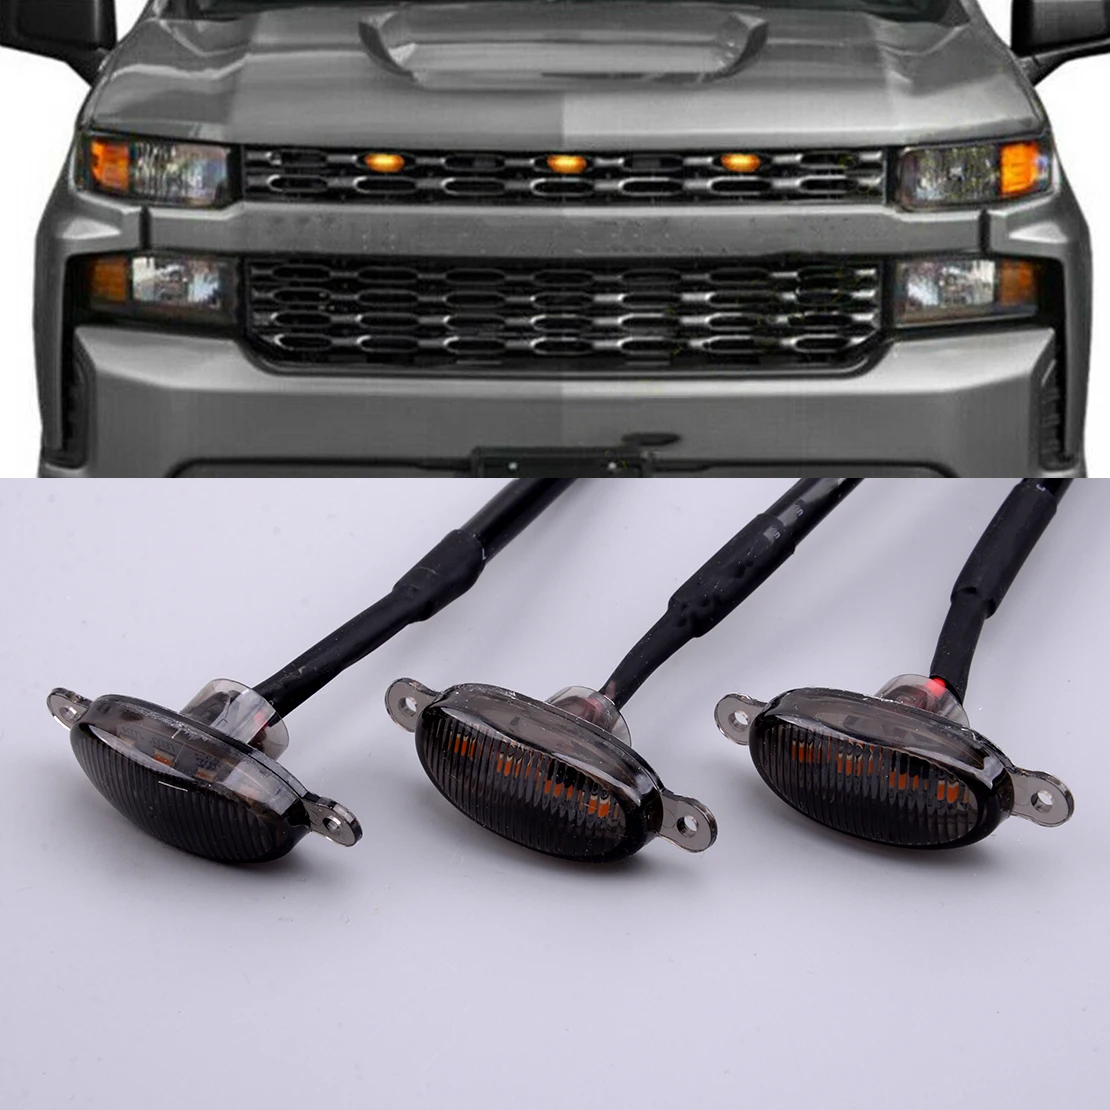 3Pcs Car Front Grille LED Light Grill Trim Smoked Lens Fit For Chevrolet Silverado 1500 2016 2017 2018 2019 2021